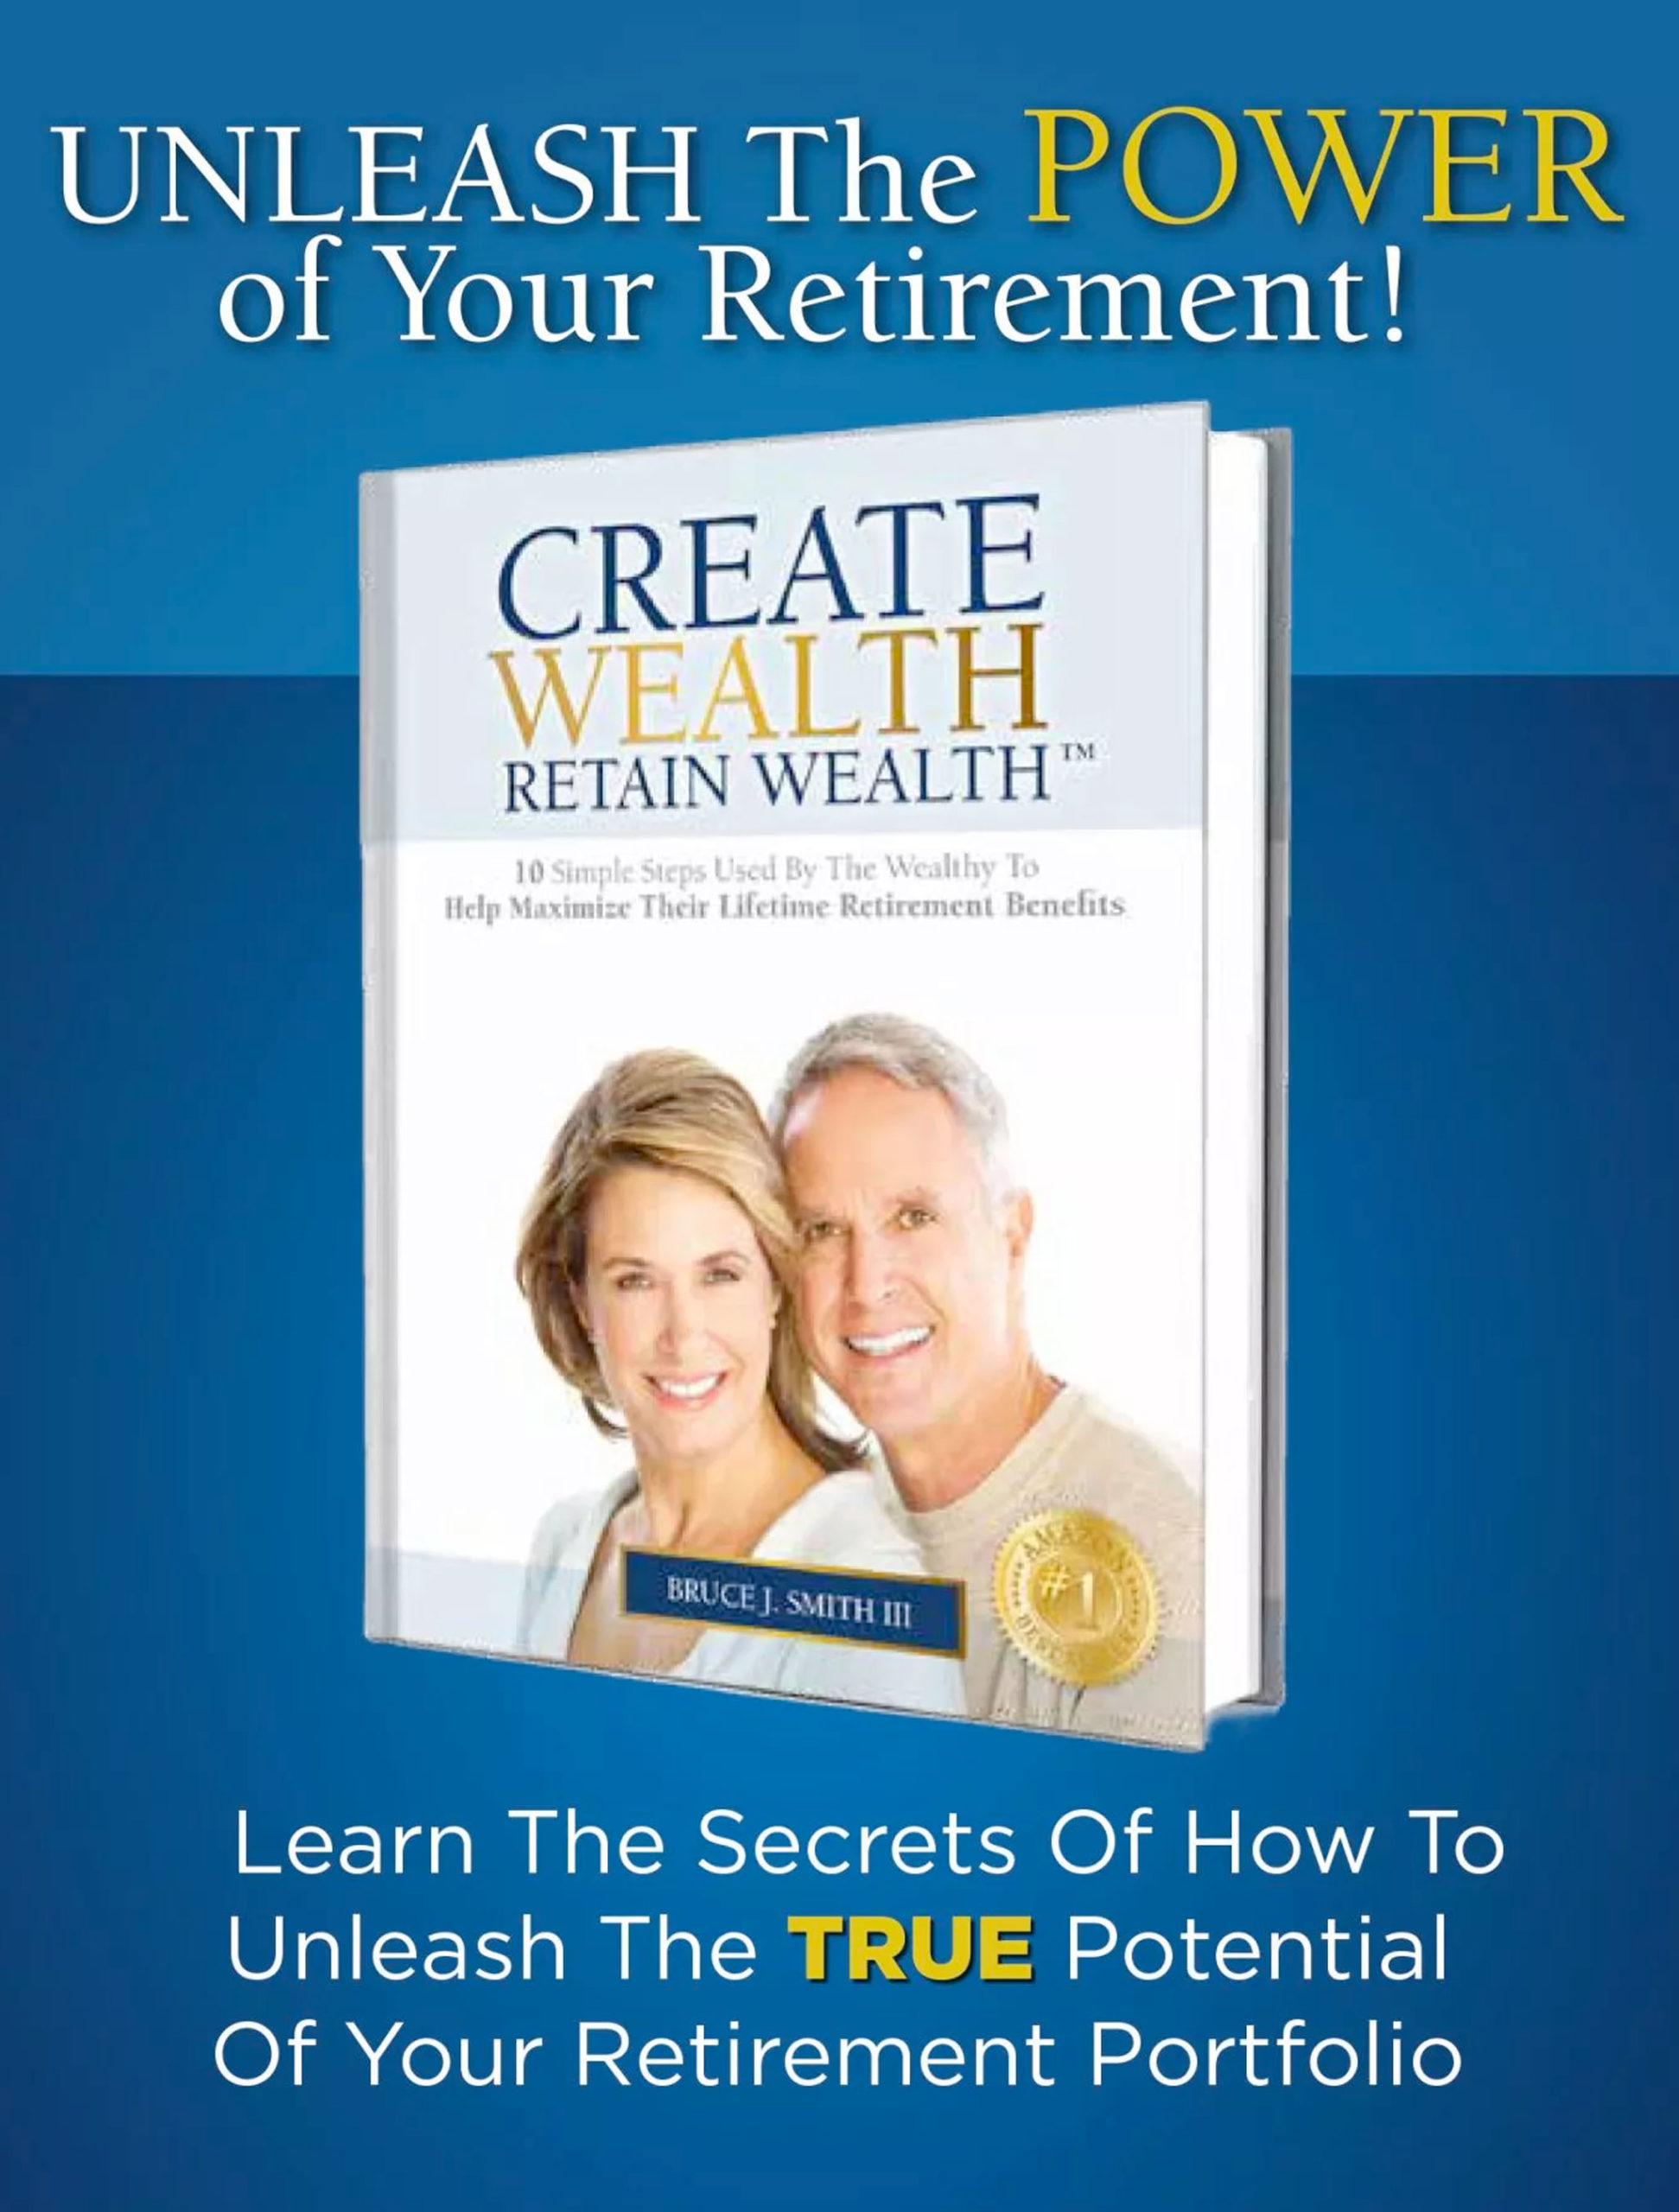 Photo of the book Create Wealth Retain Wealth by Bruce J. Smith III